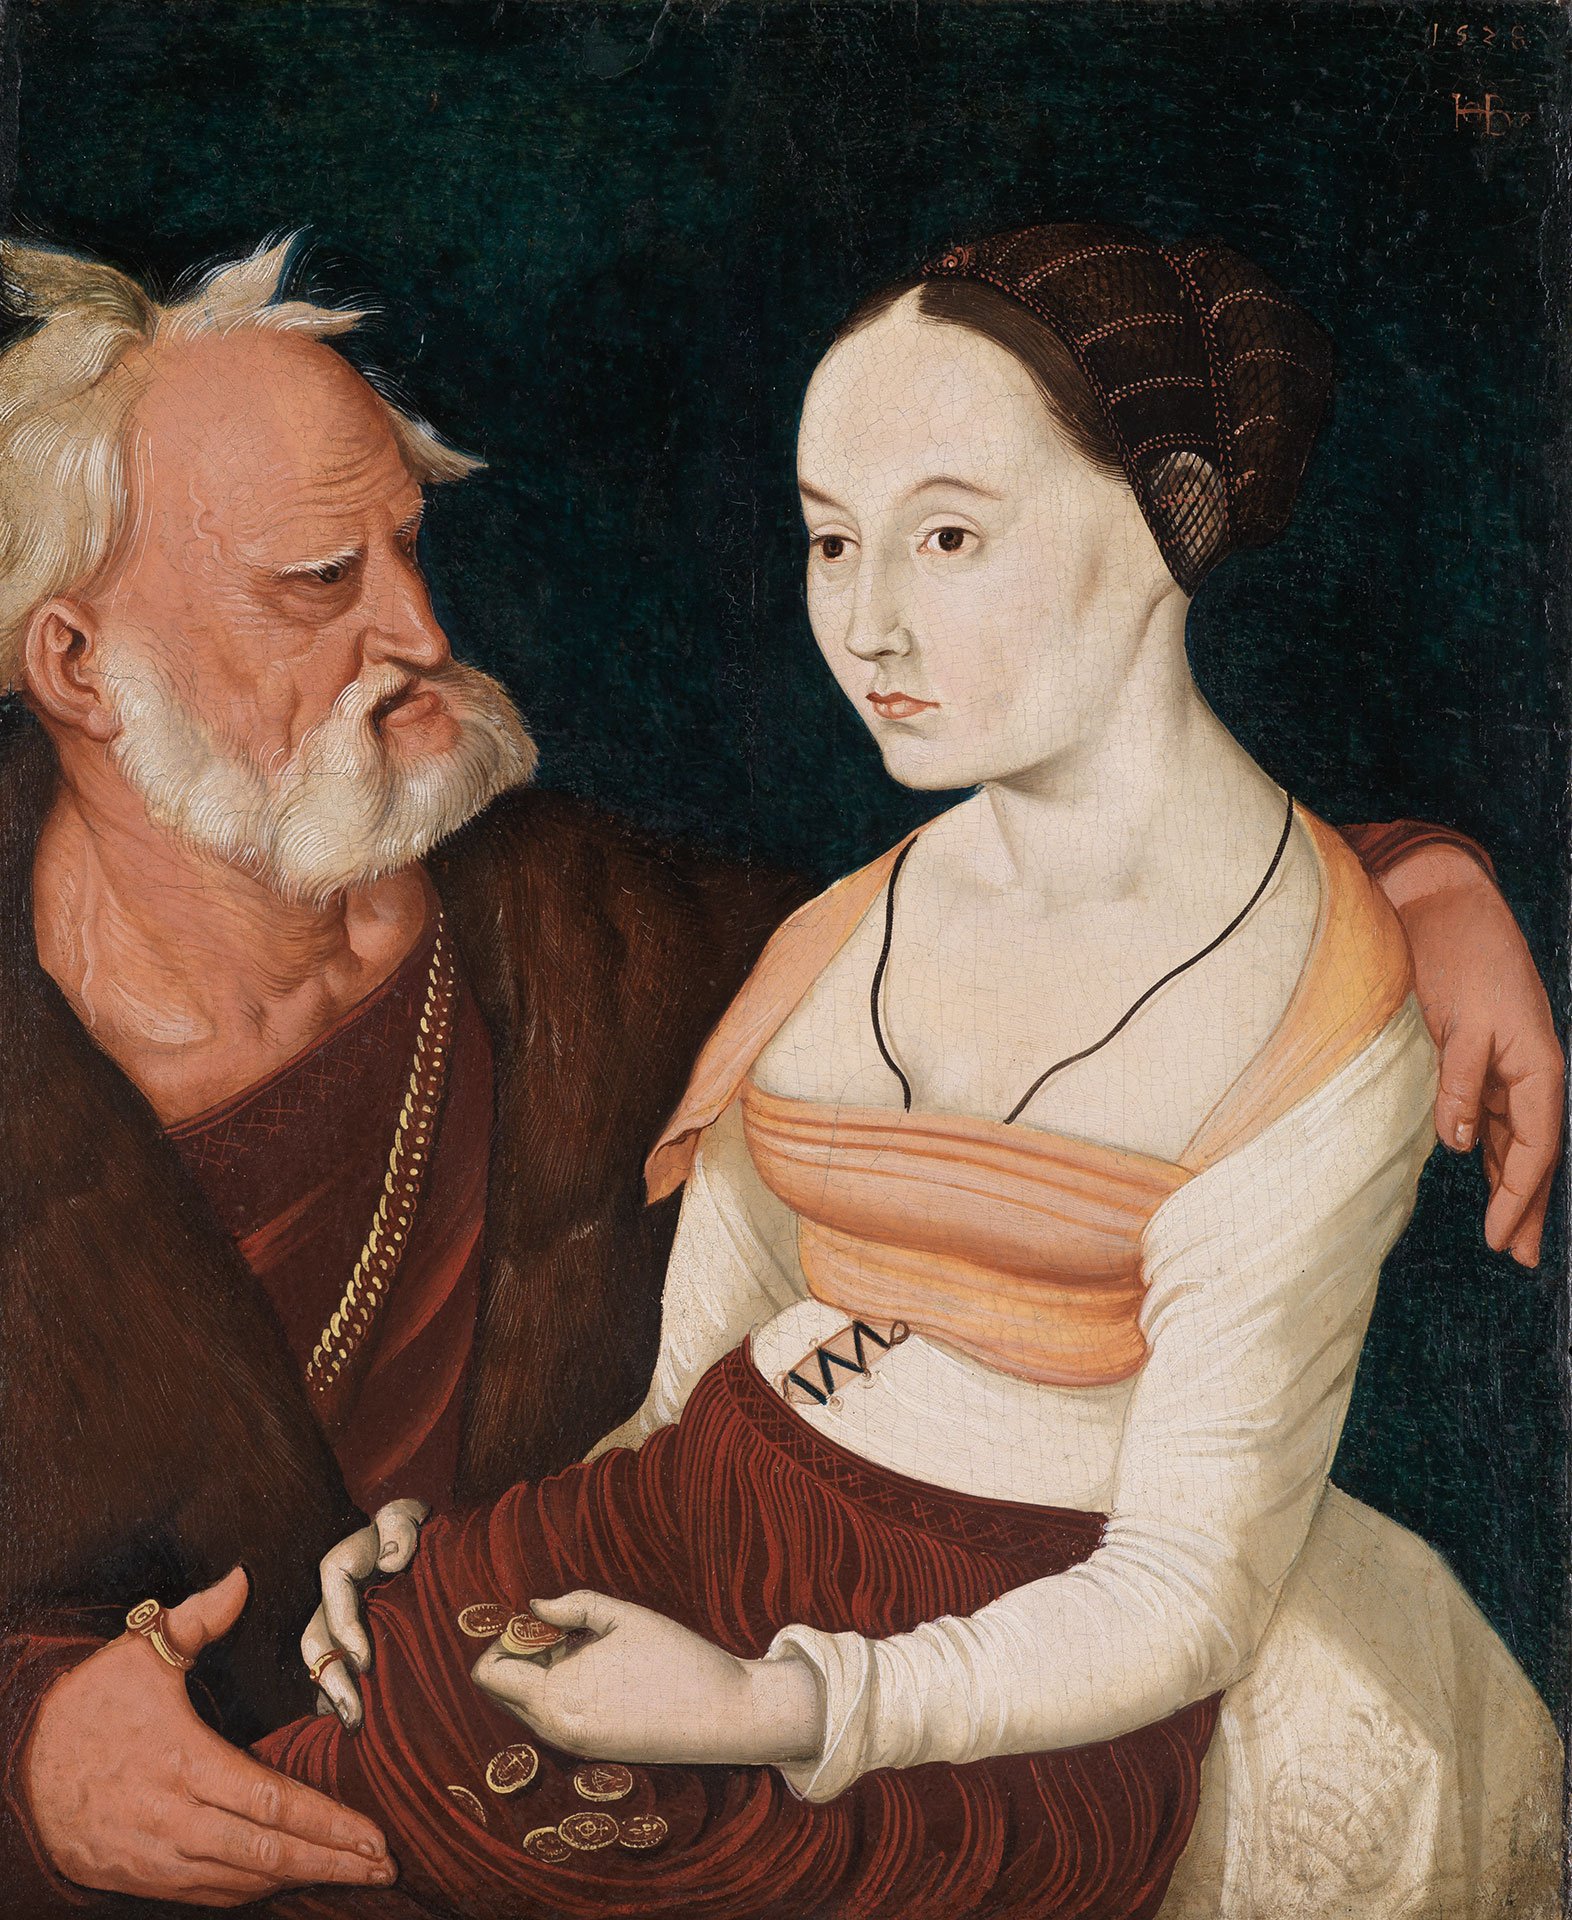 A young woman sits with coins in her apron. An old man sits on the left and puts his hand around the woman. The work of art was part of an exhibition at the Staatliche Kunsthalle Karlsruhe.